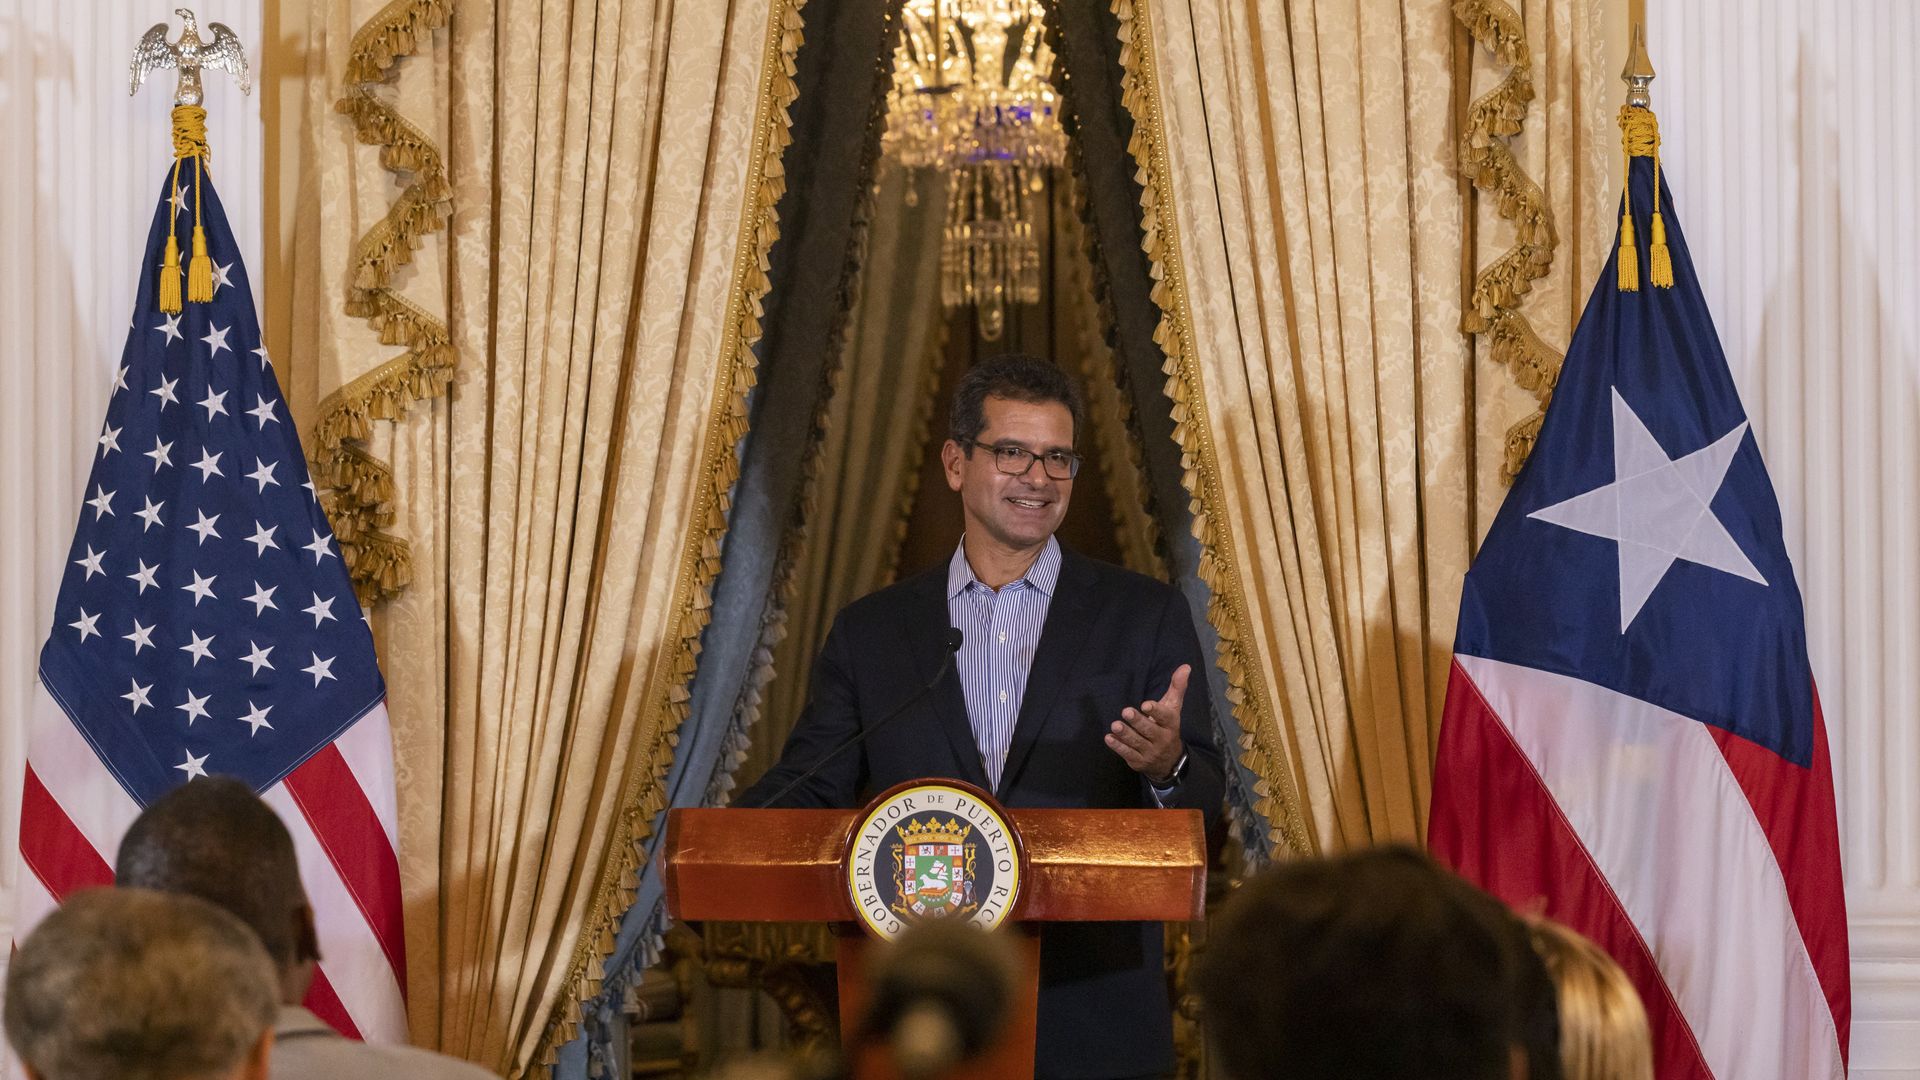 Puerto Rico's governor Pedro Pierluisi stands next to a Puerto Rican flag and US flag